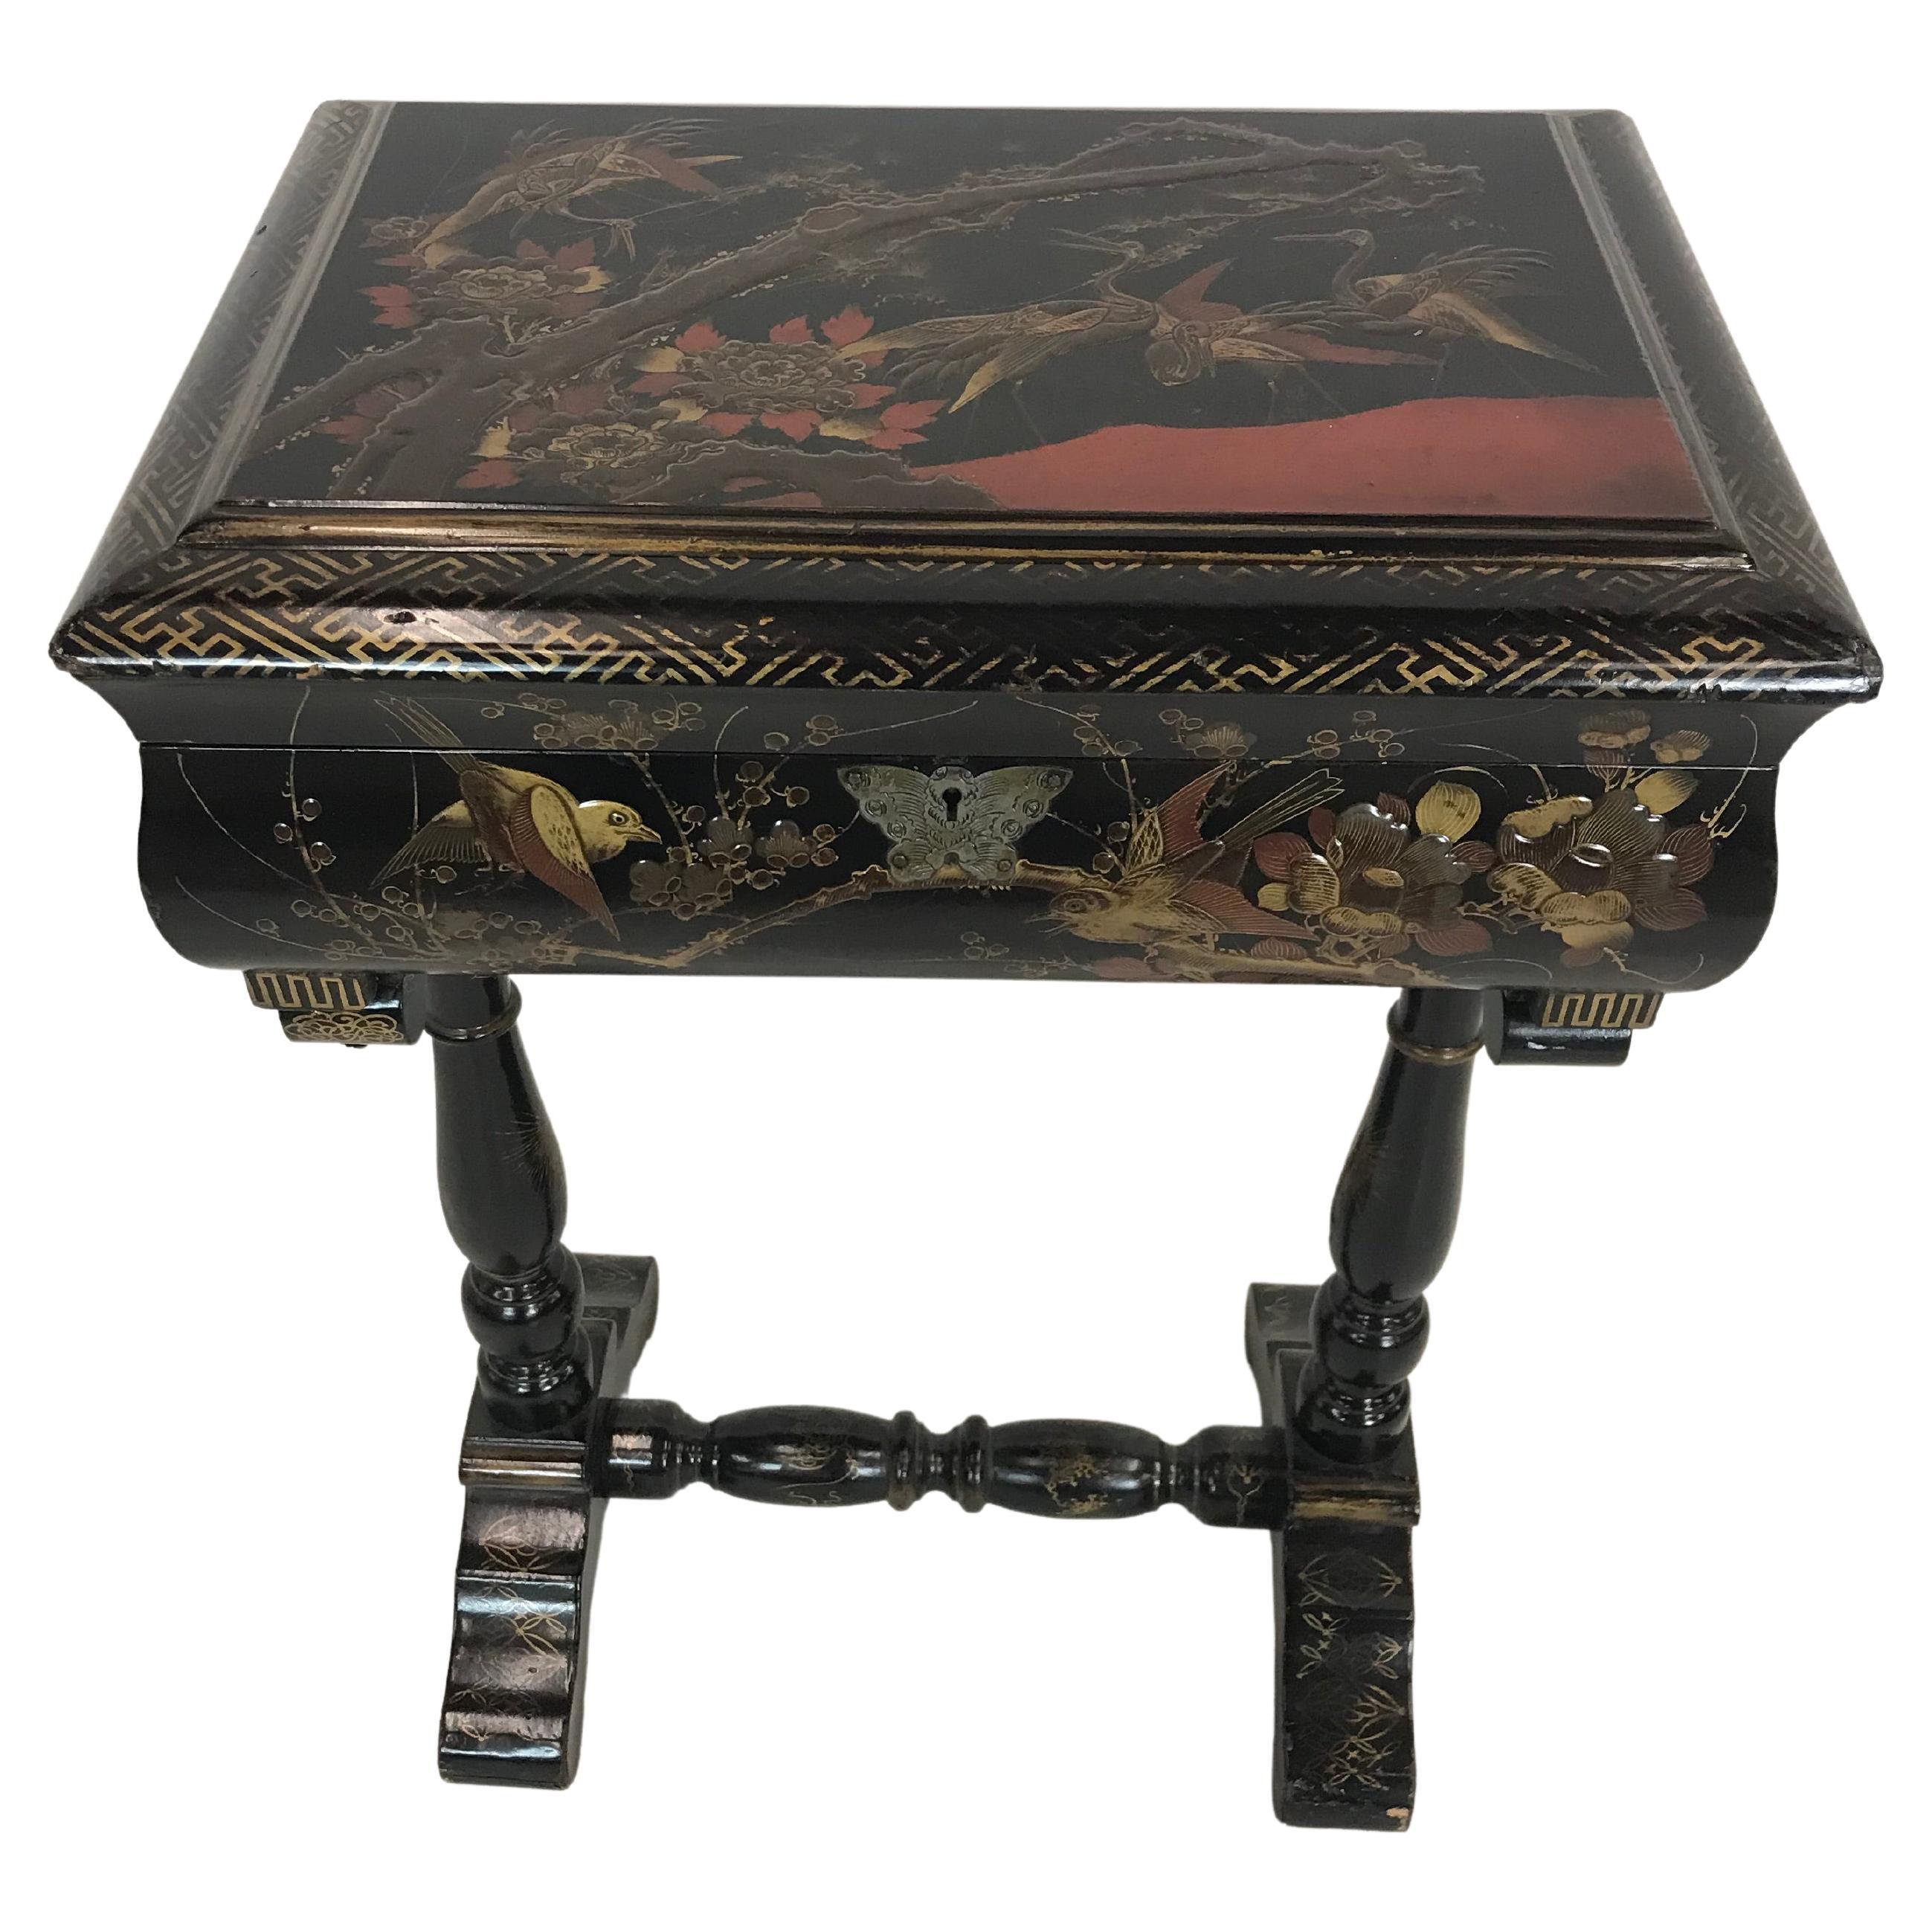 Japanese Lacquer Sewing Table